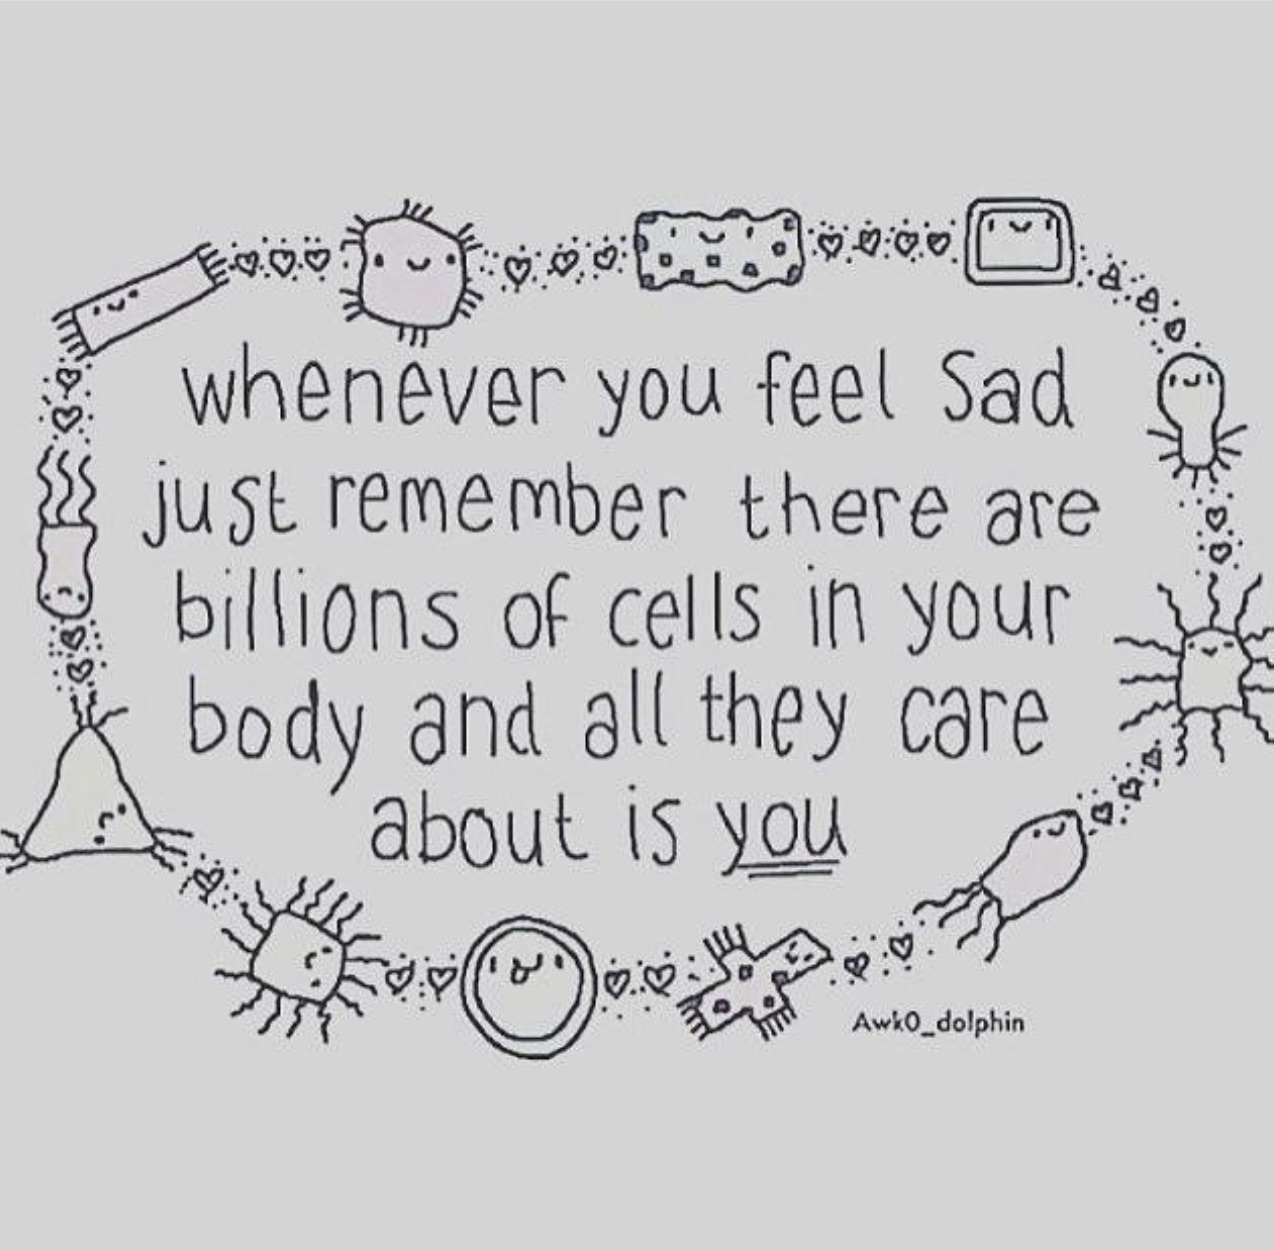 Your Cells